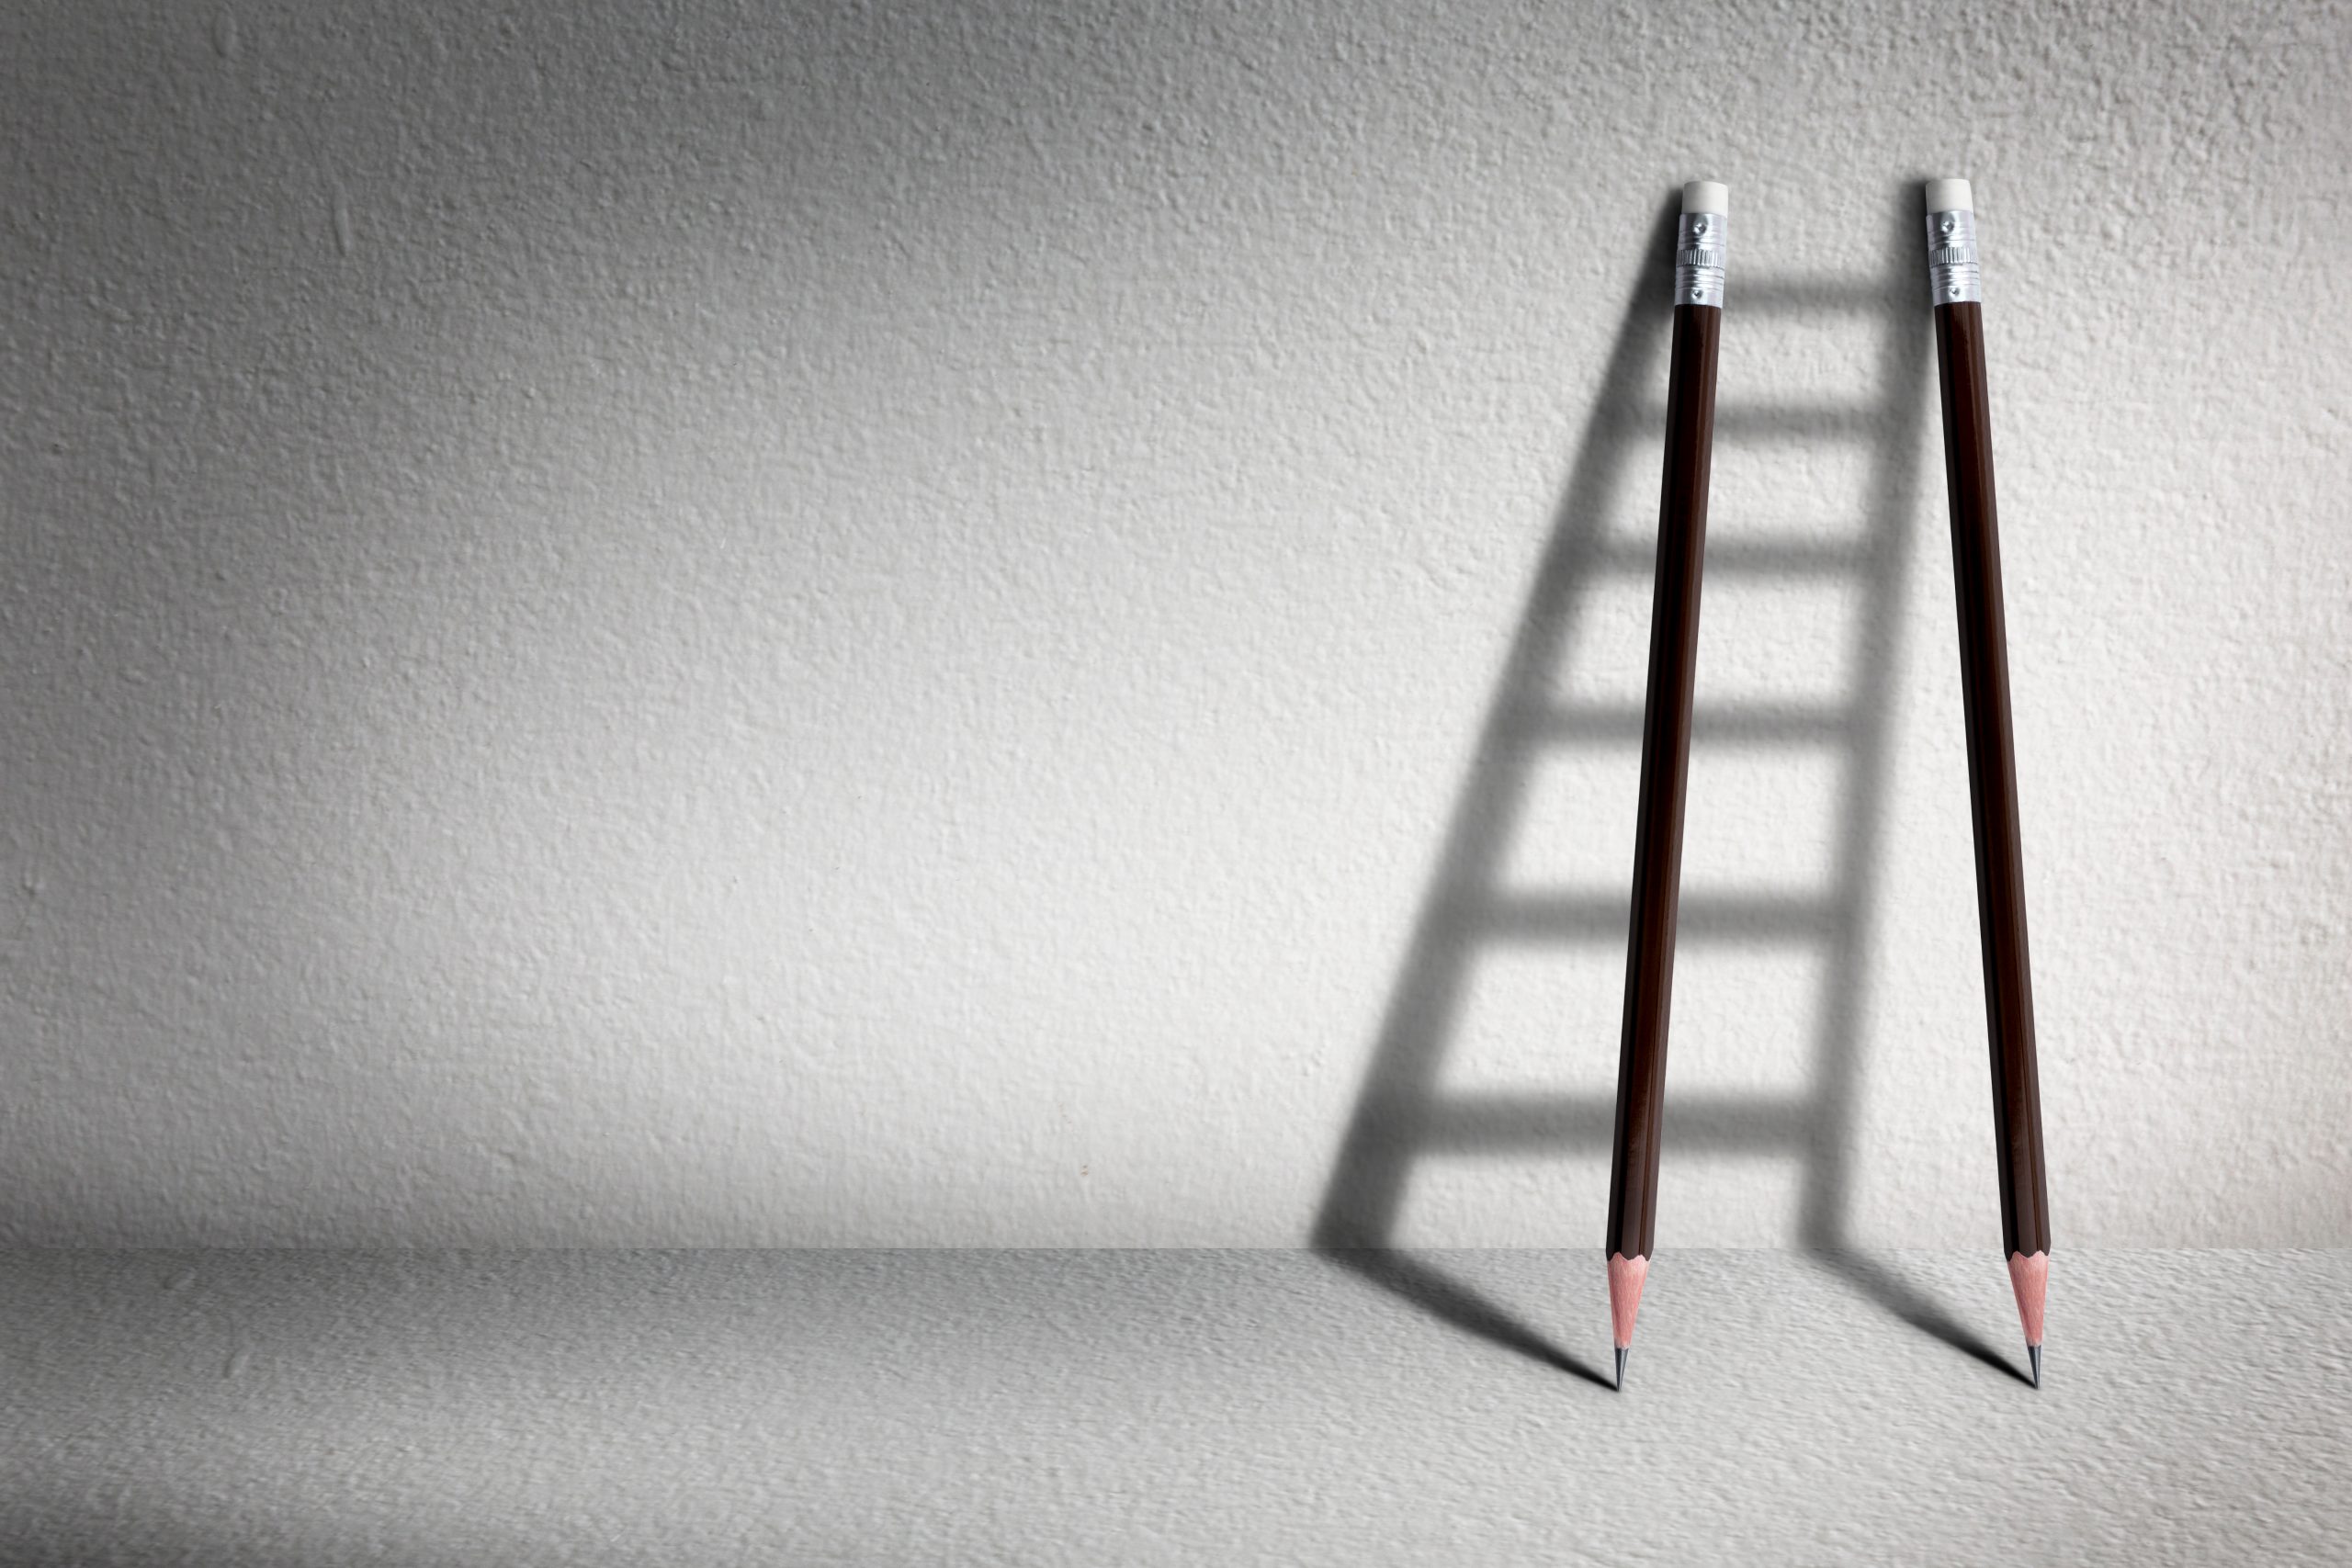 Two pencils lay next to a wall casting the shadow of a ladder